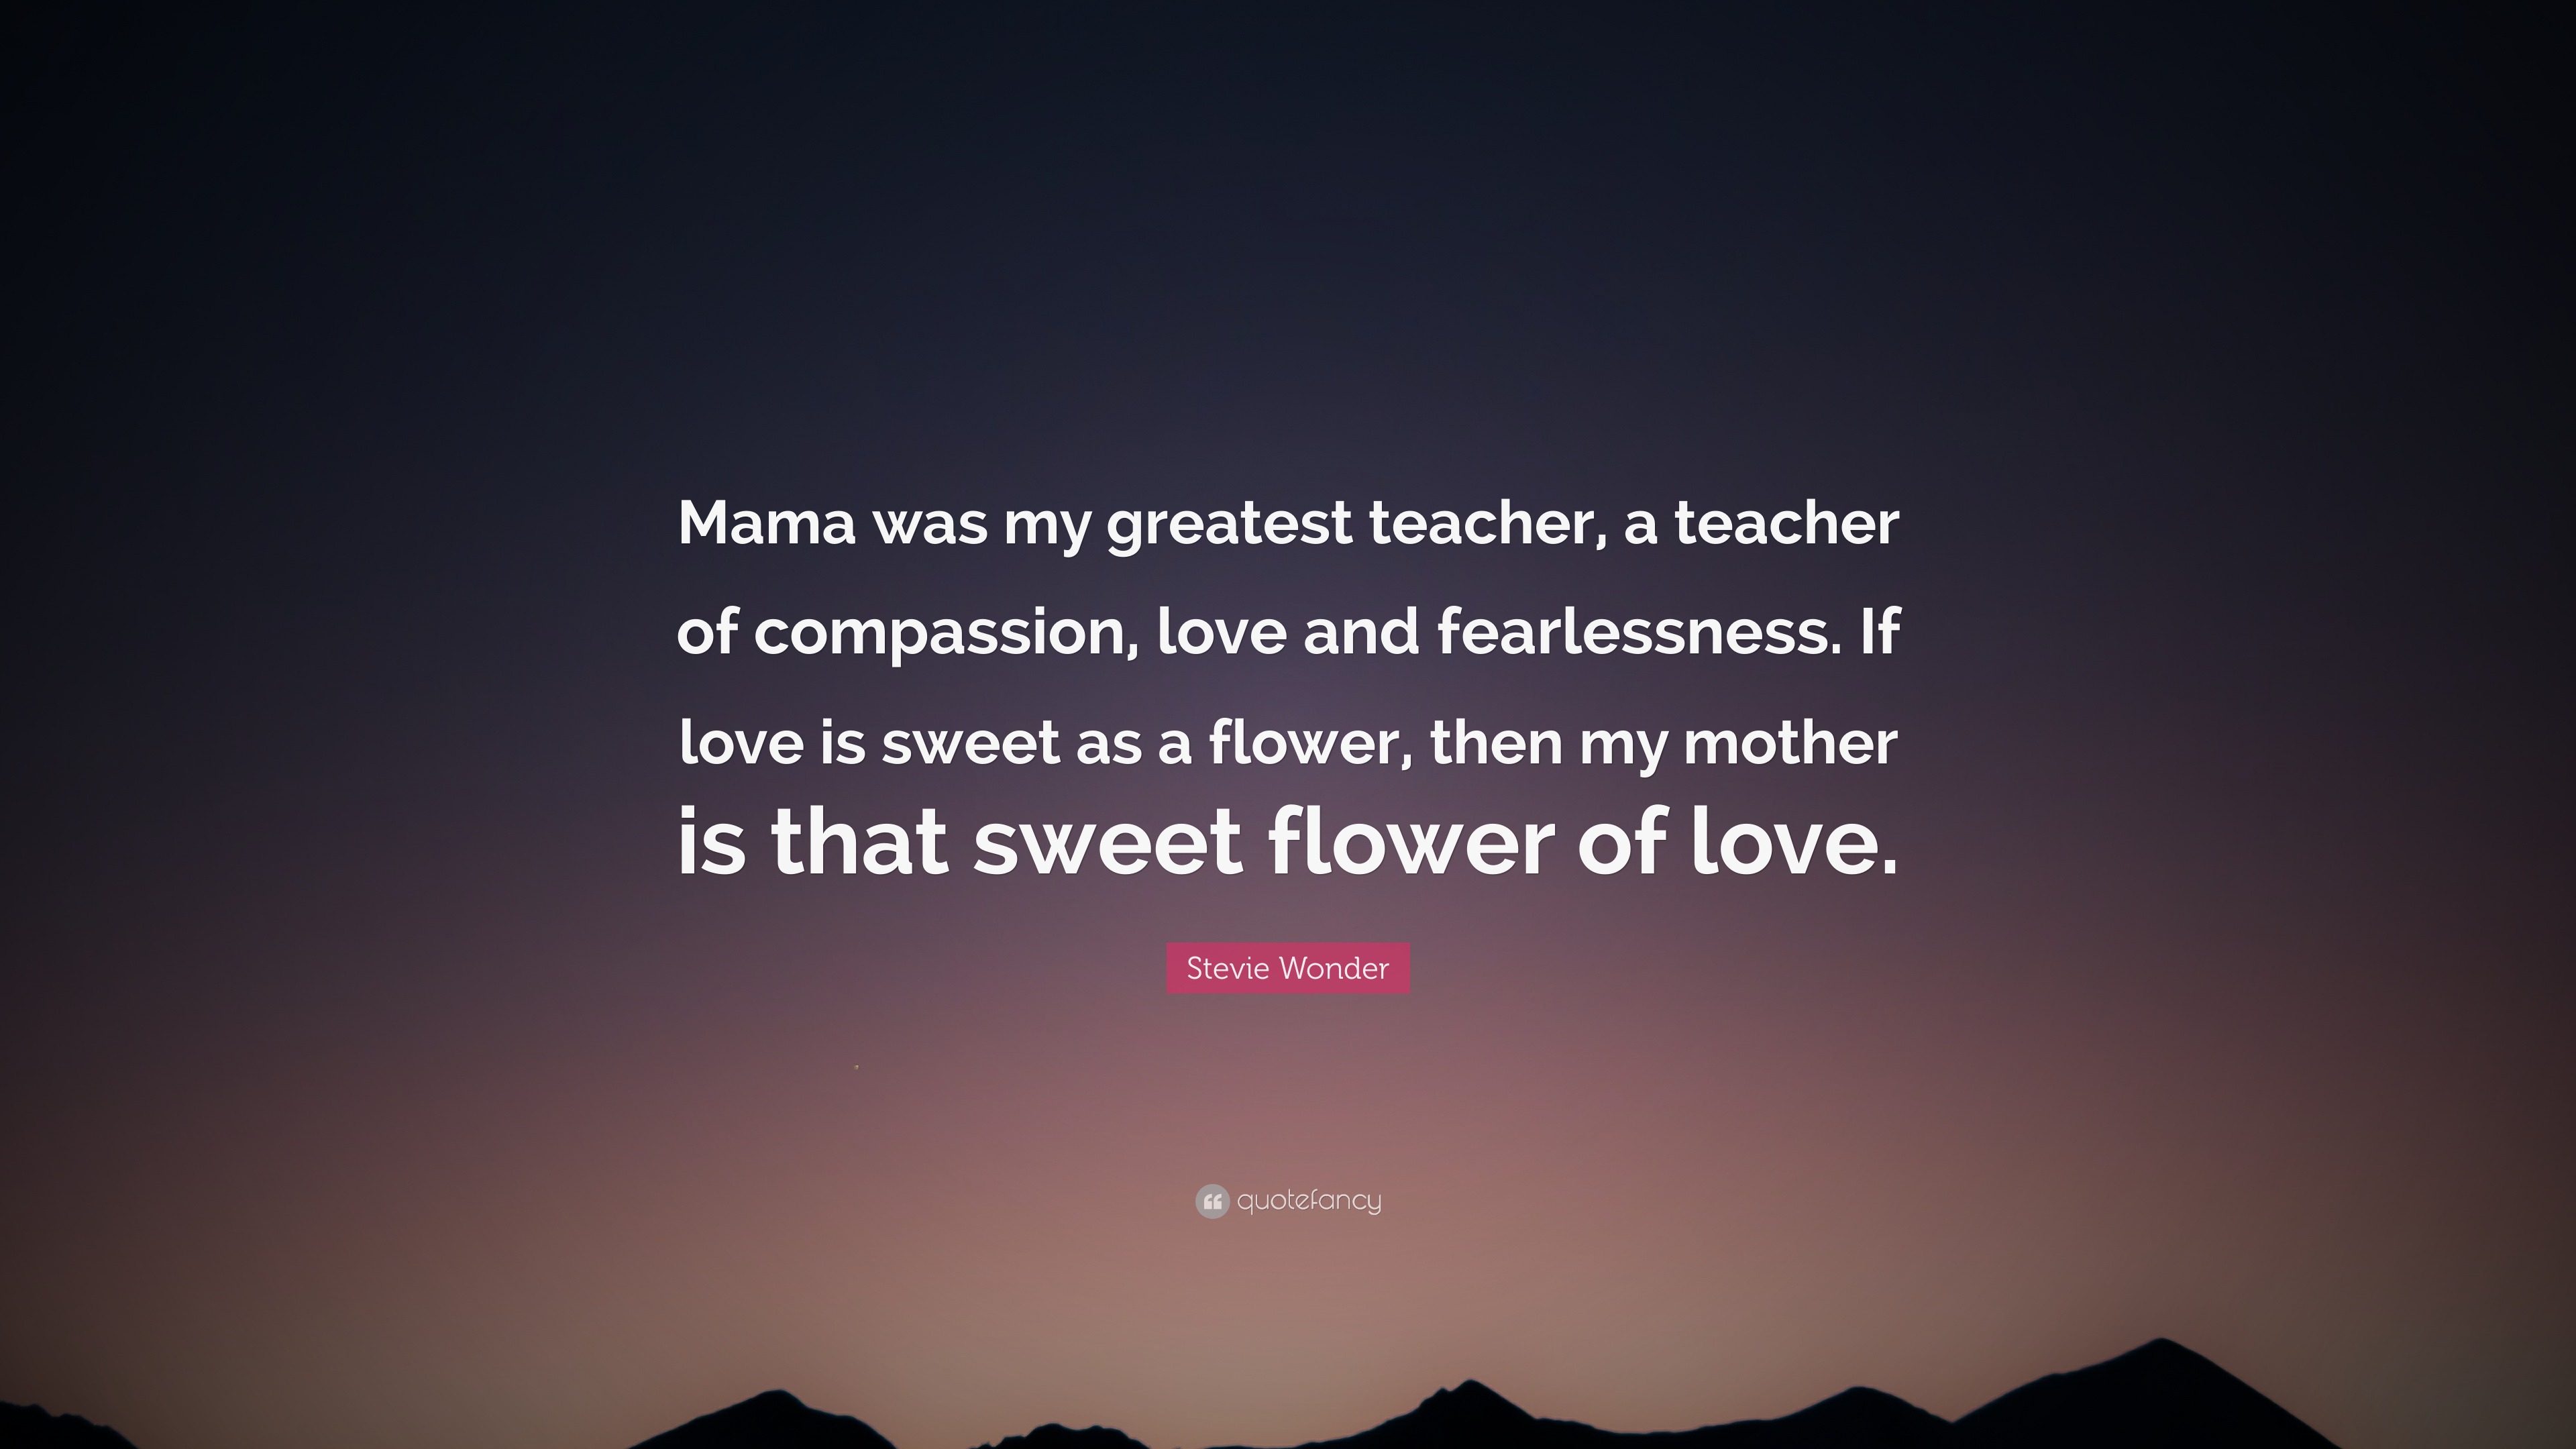 Stevie Wonder Quote: “Mama was my greatest teacher, a teacher of compassion, love and fearlessness. If love is sweet as a flower, then my moth...”